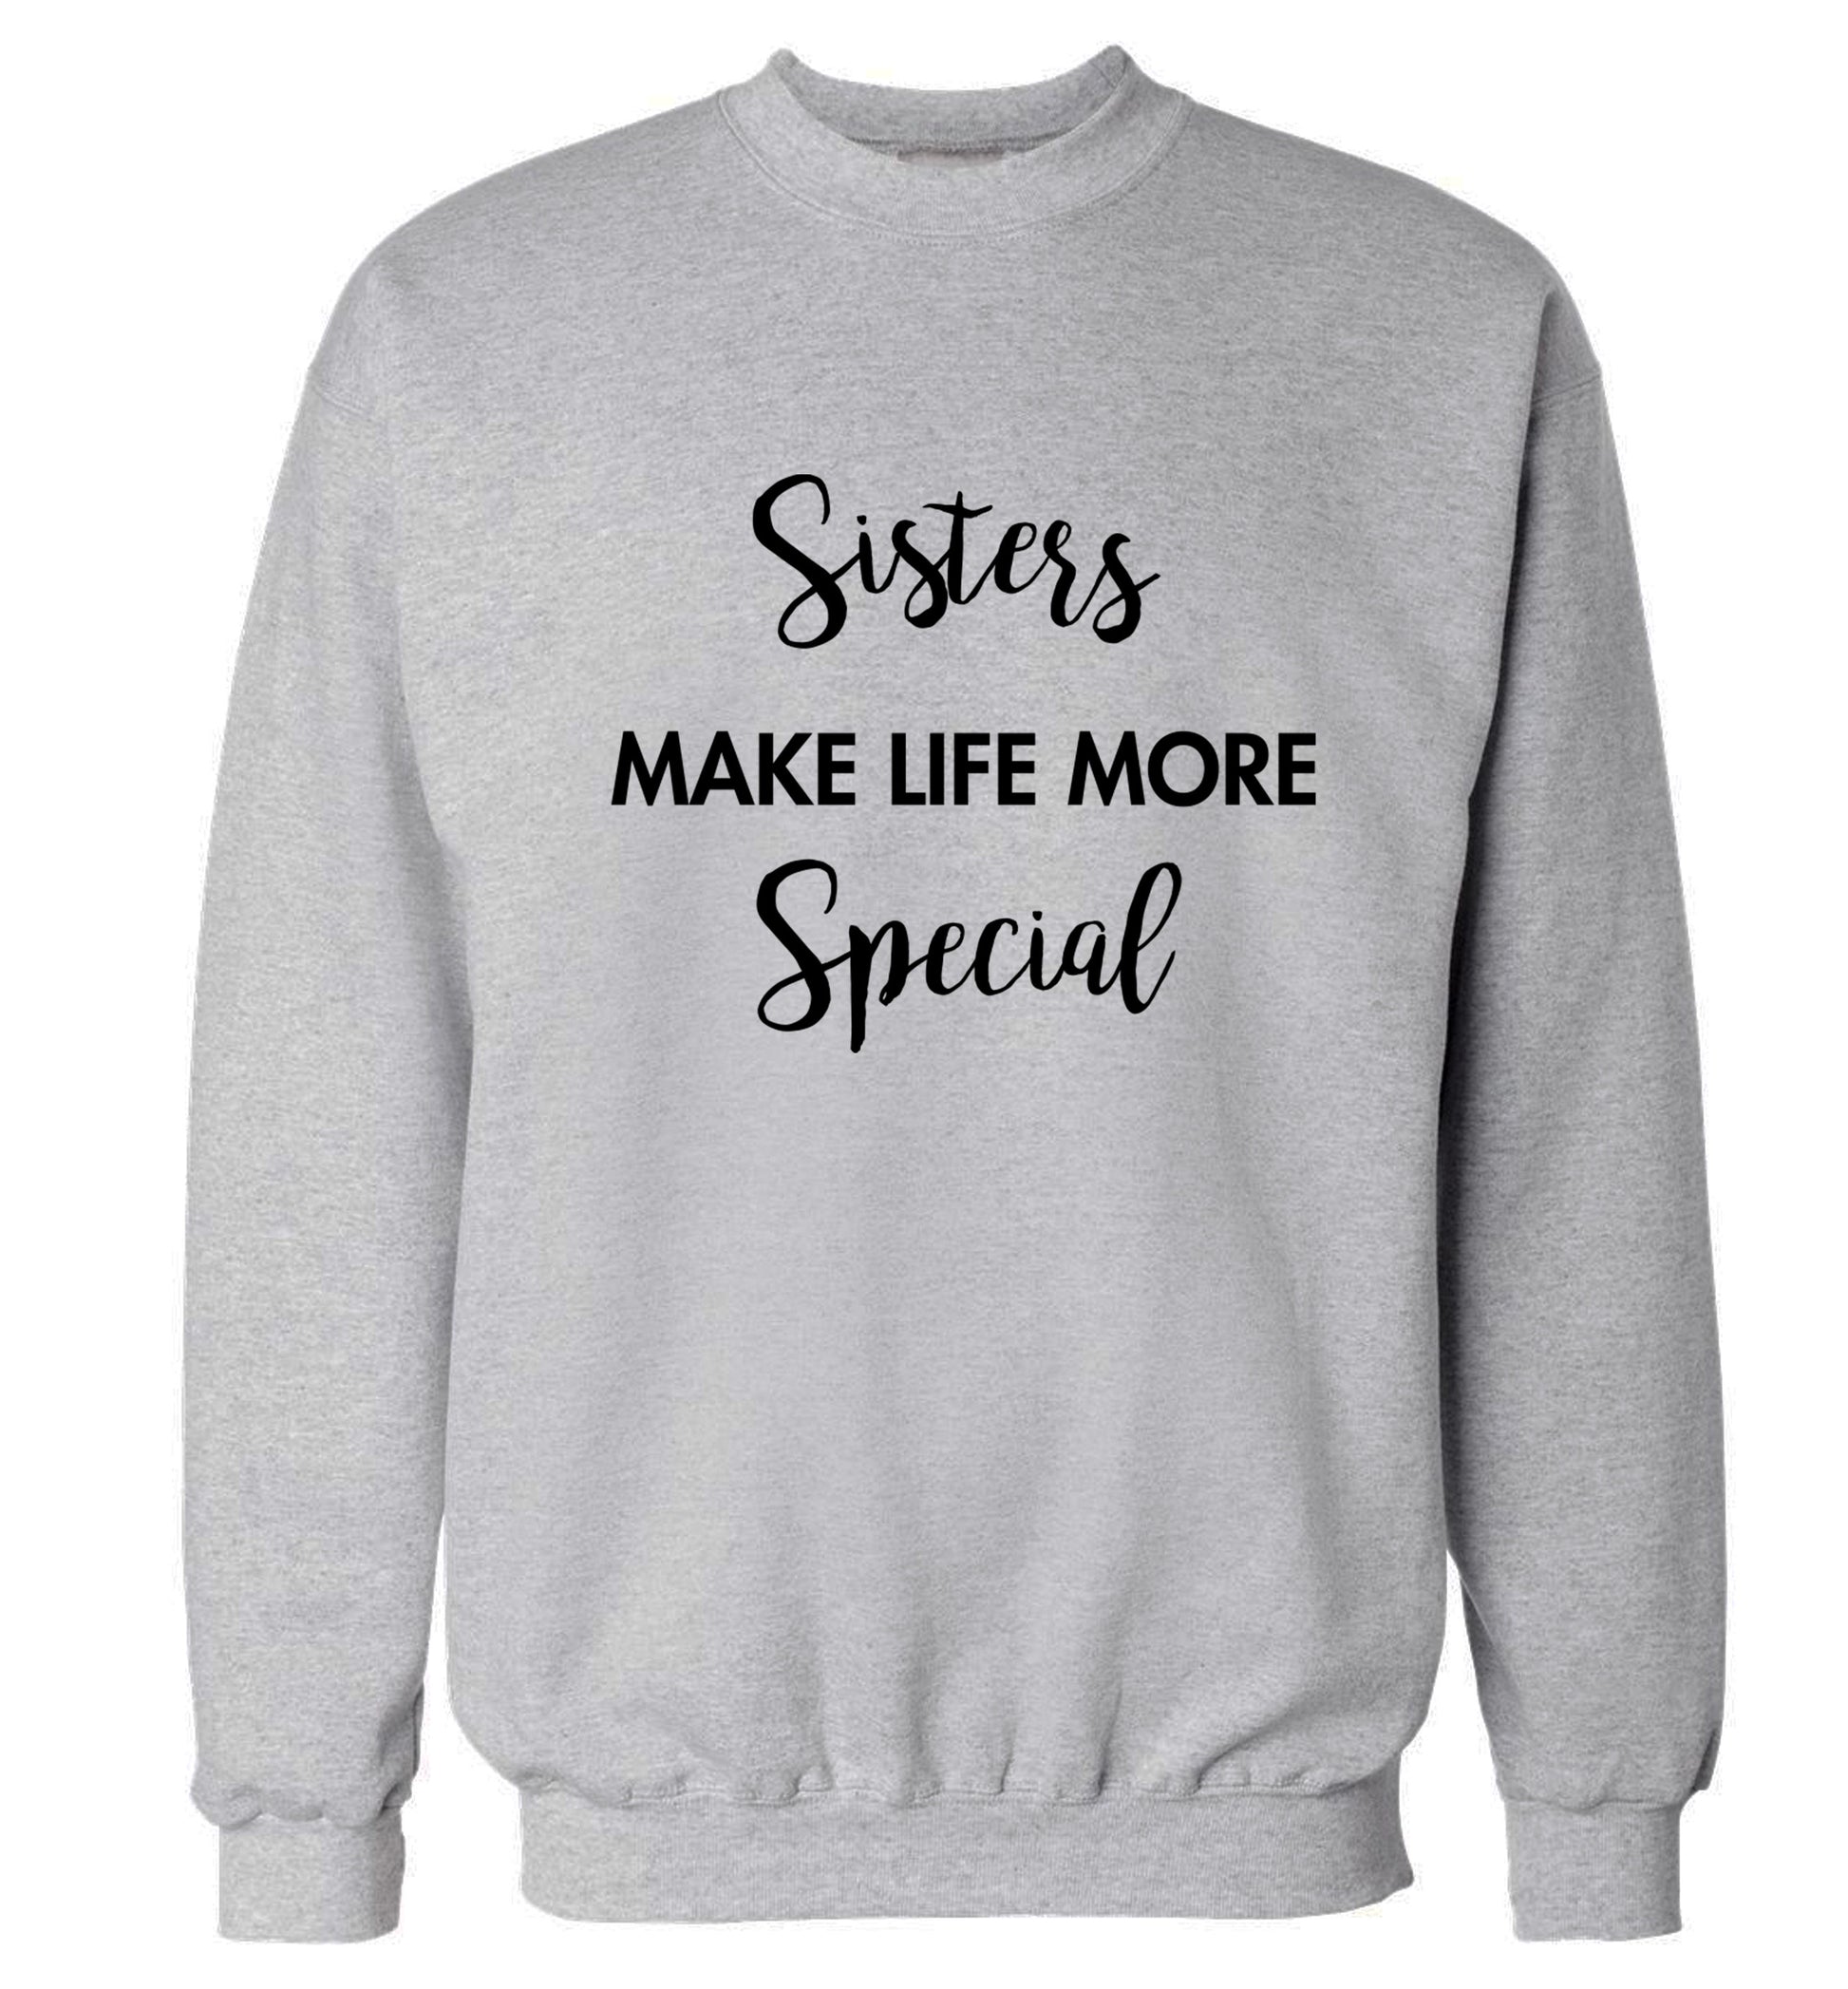 Sisters make life more special Adult's unisex grey Sweater 2XL